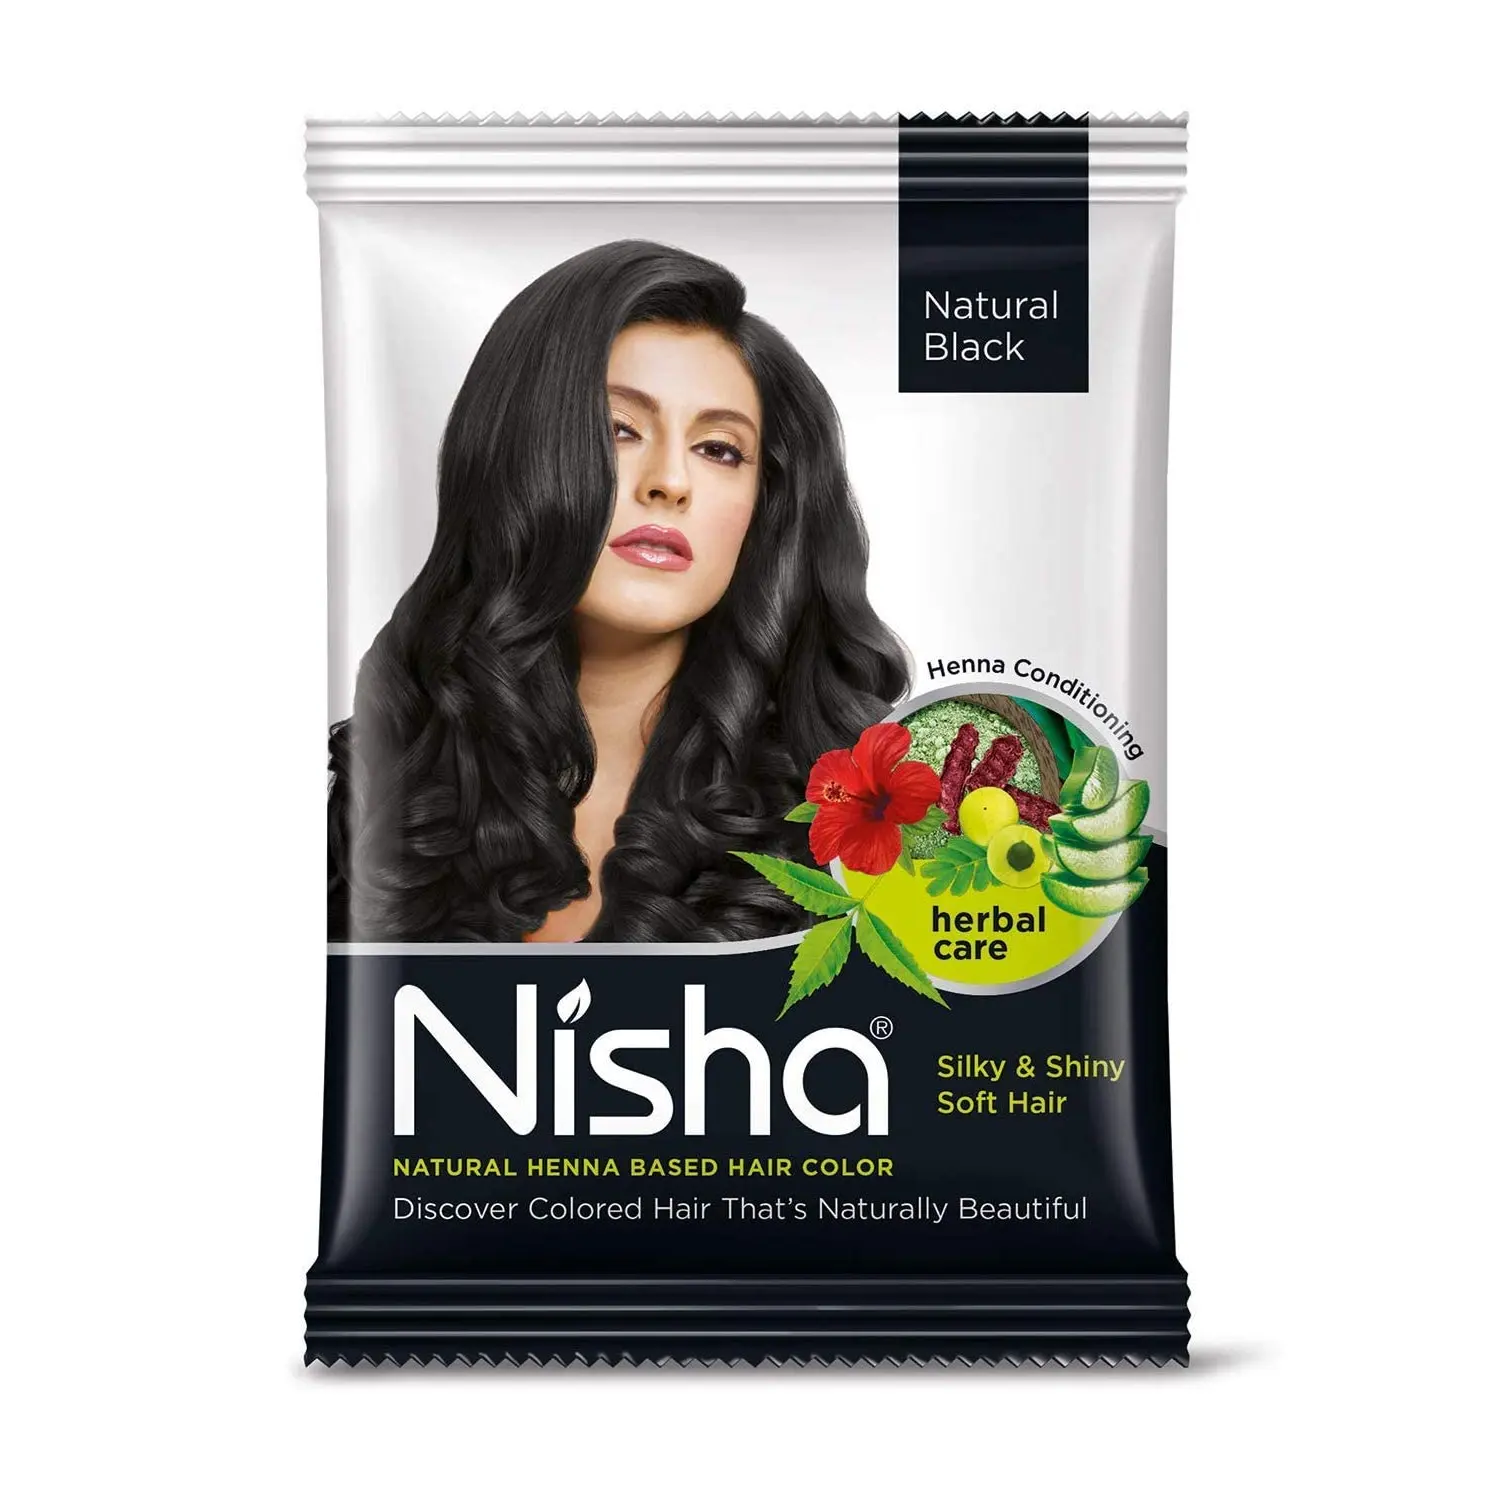 Best Selling Natural Henna Based Hair Color Dye with Natural Look Without Ammonia Men & Women Hair Color Dye